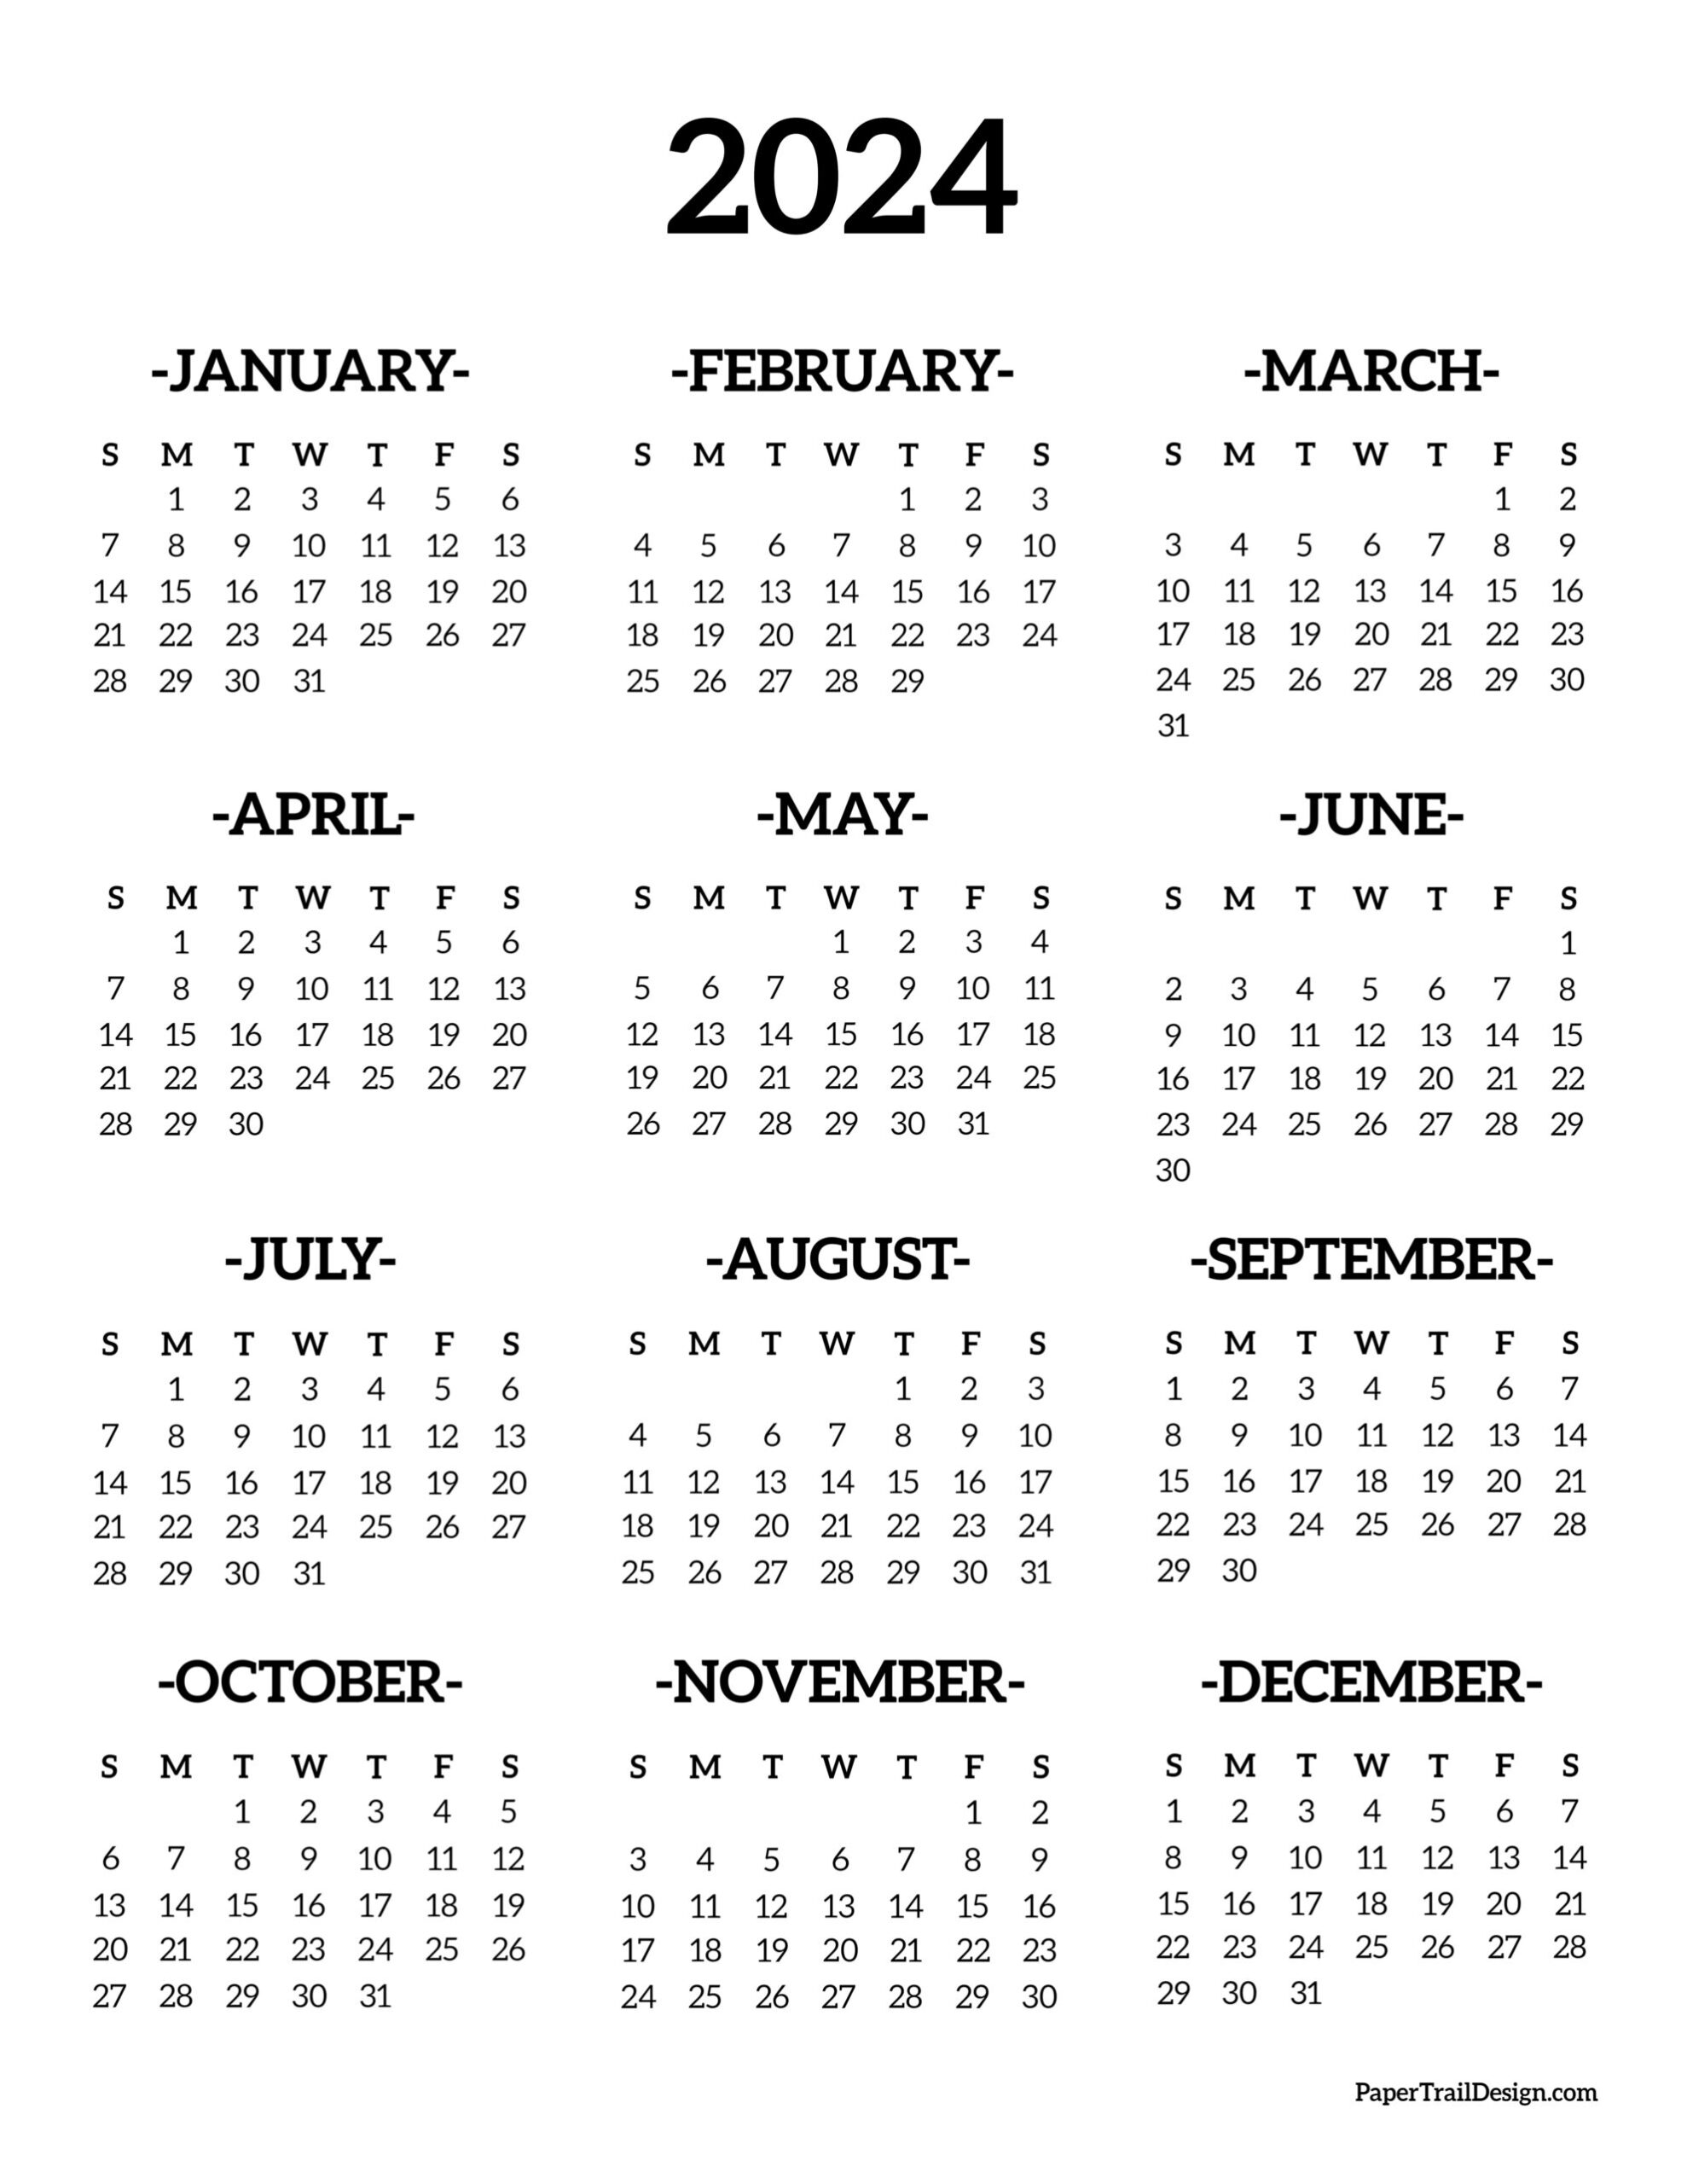 Calendar 2024 Printable One Page - Paper Trail Design for Free Printable 12-Month Calendar On One Page 2024